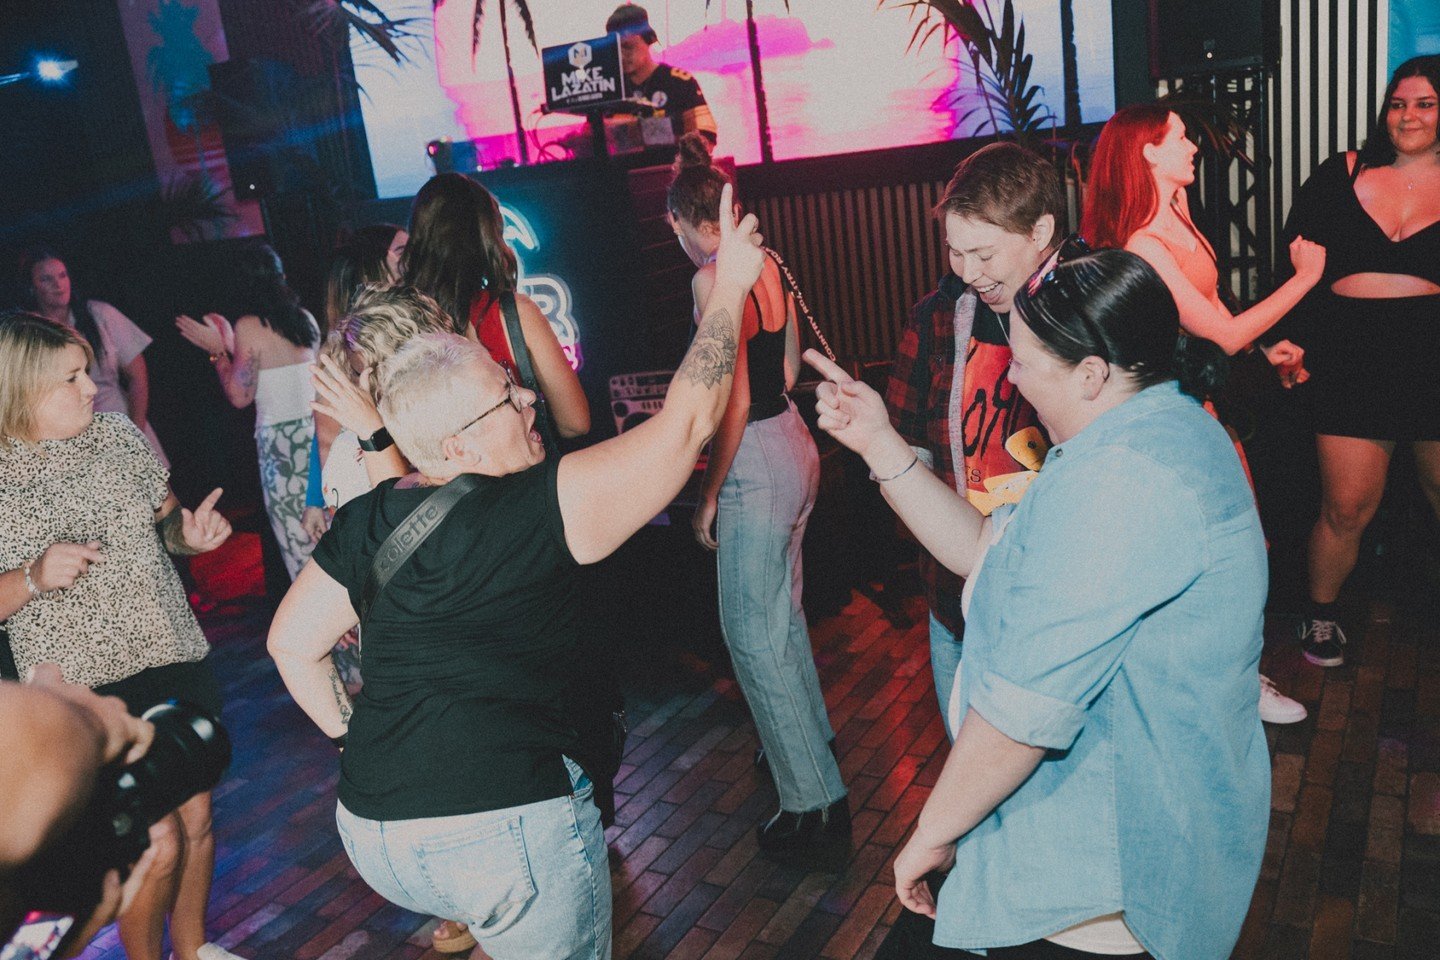 Every Friday from 8pm, we're bringing all your fave #THROWBACK bangers with Pub Troppo! 🦩

💿 Retro DJ's 
🎙 Karaoke 
🍹 Troppo Cocko's

Get your weekend started at Hotel Gosford. We'll see you at the bar!

#PubTroppo #LikeWeUsedTo